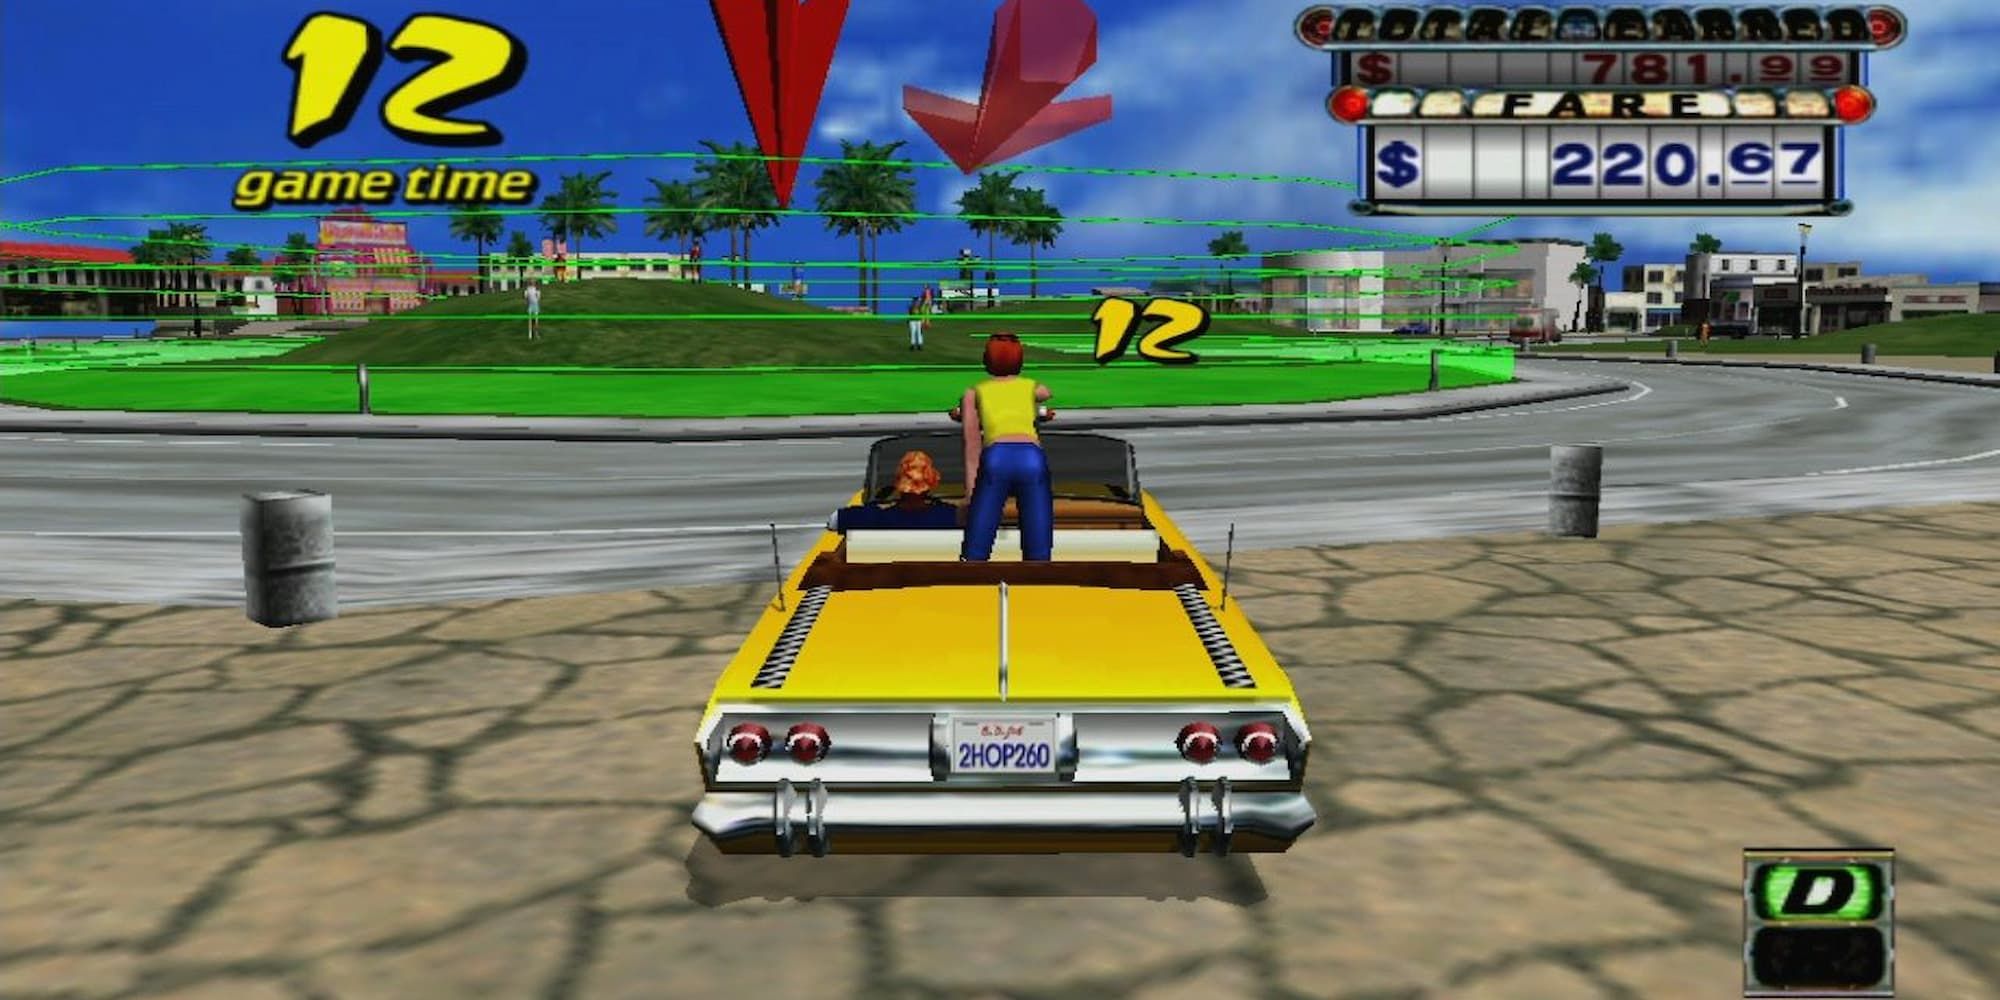 Sega reportedly has a Crazy Taxi reboot under way with Jet Set